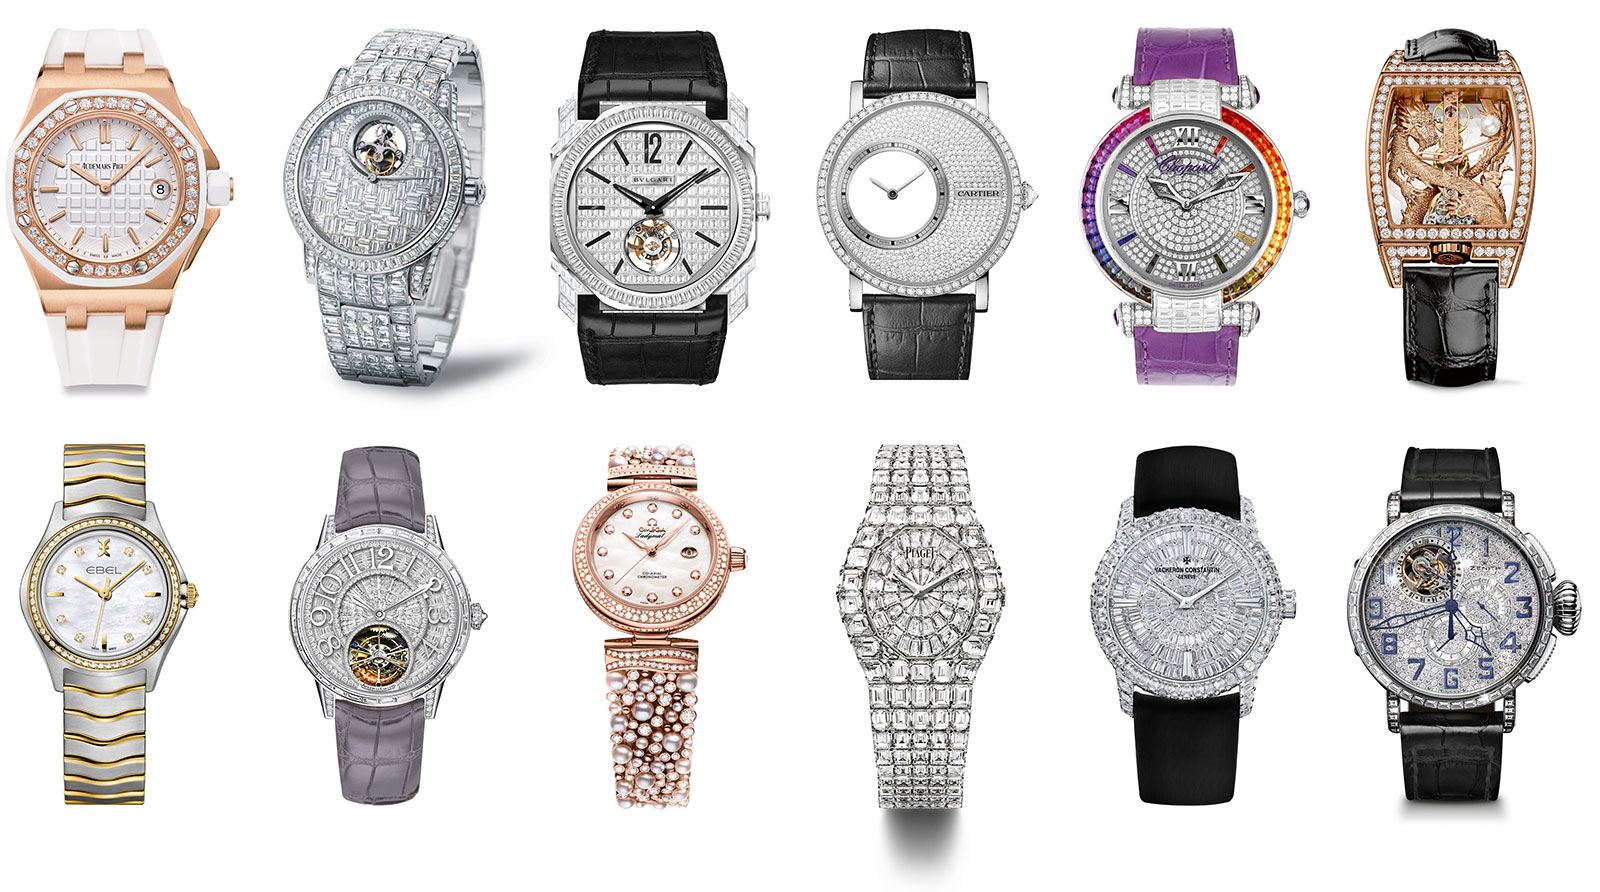 Presenting Jewellery Time 2014 in Singapore | SJX Watches